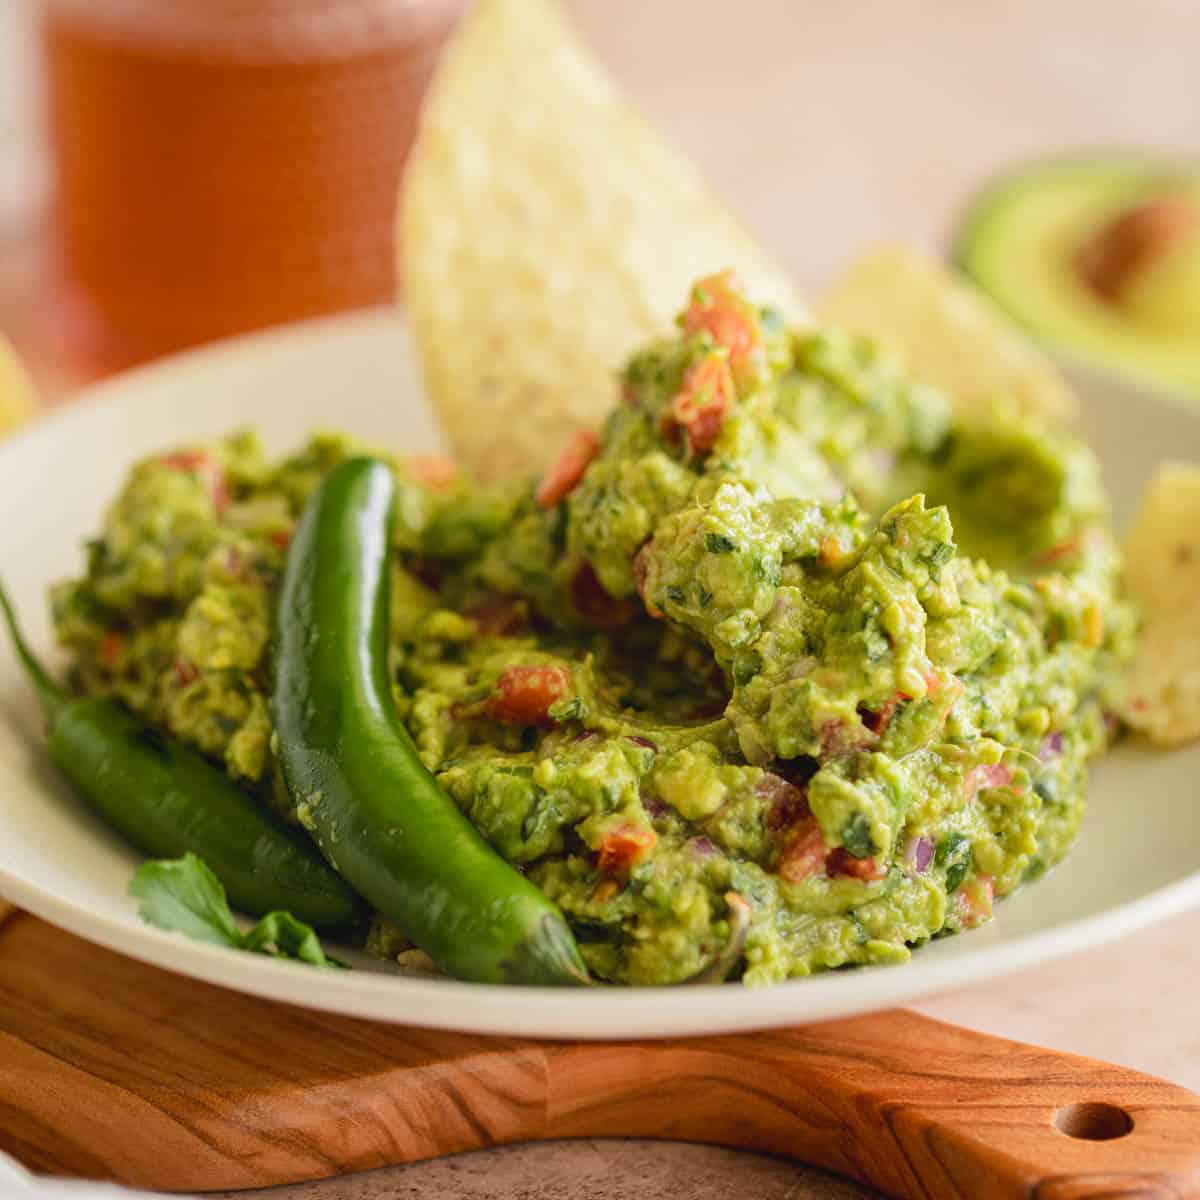 Spicy Guacamole recipe in a bowl with serrano peppers and tortilla chips.